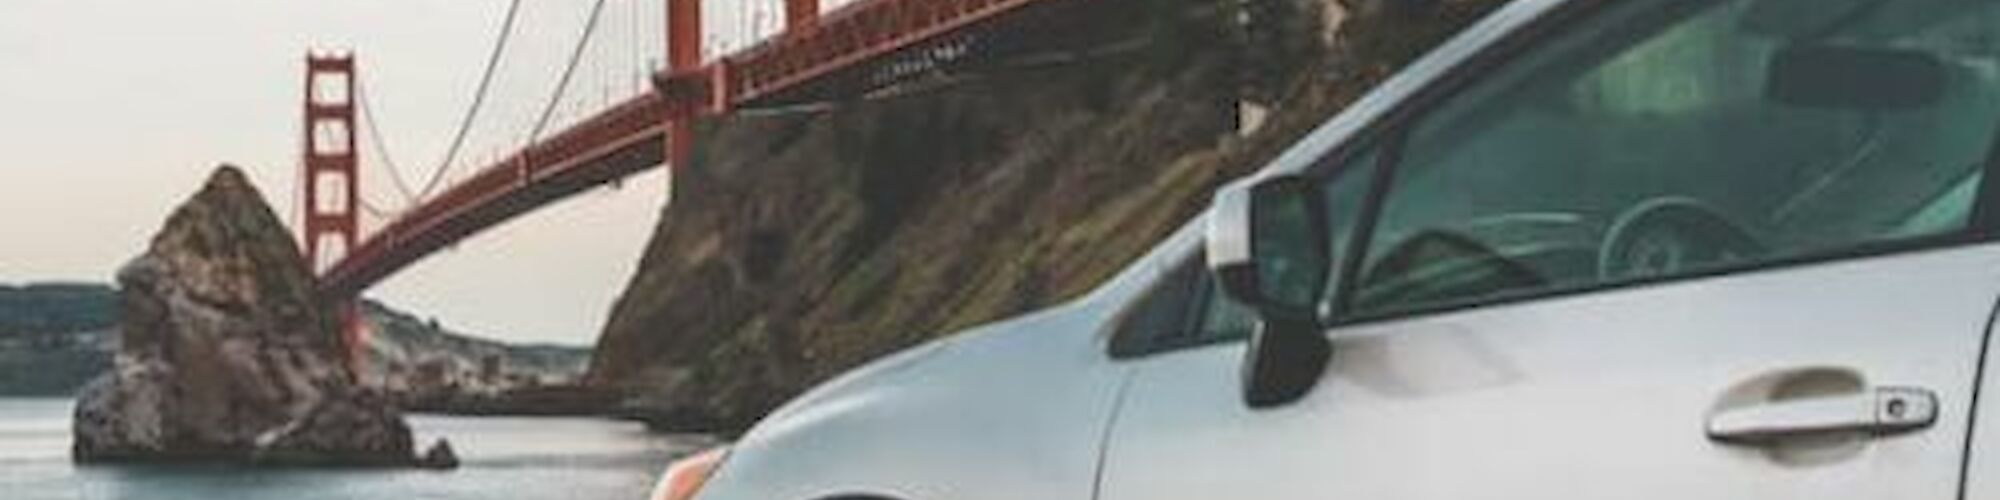 A silver car is parked near a body of water with part of the Golden Gate Bridge and a rocky island in the background.